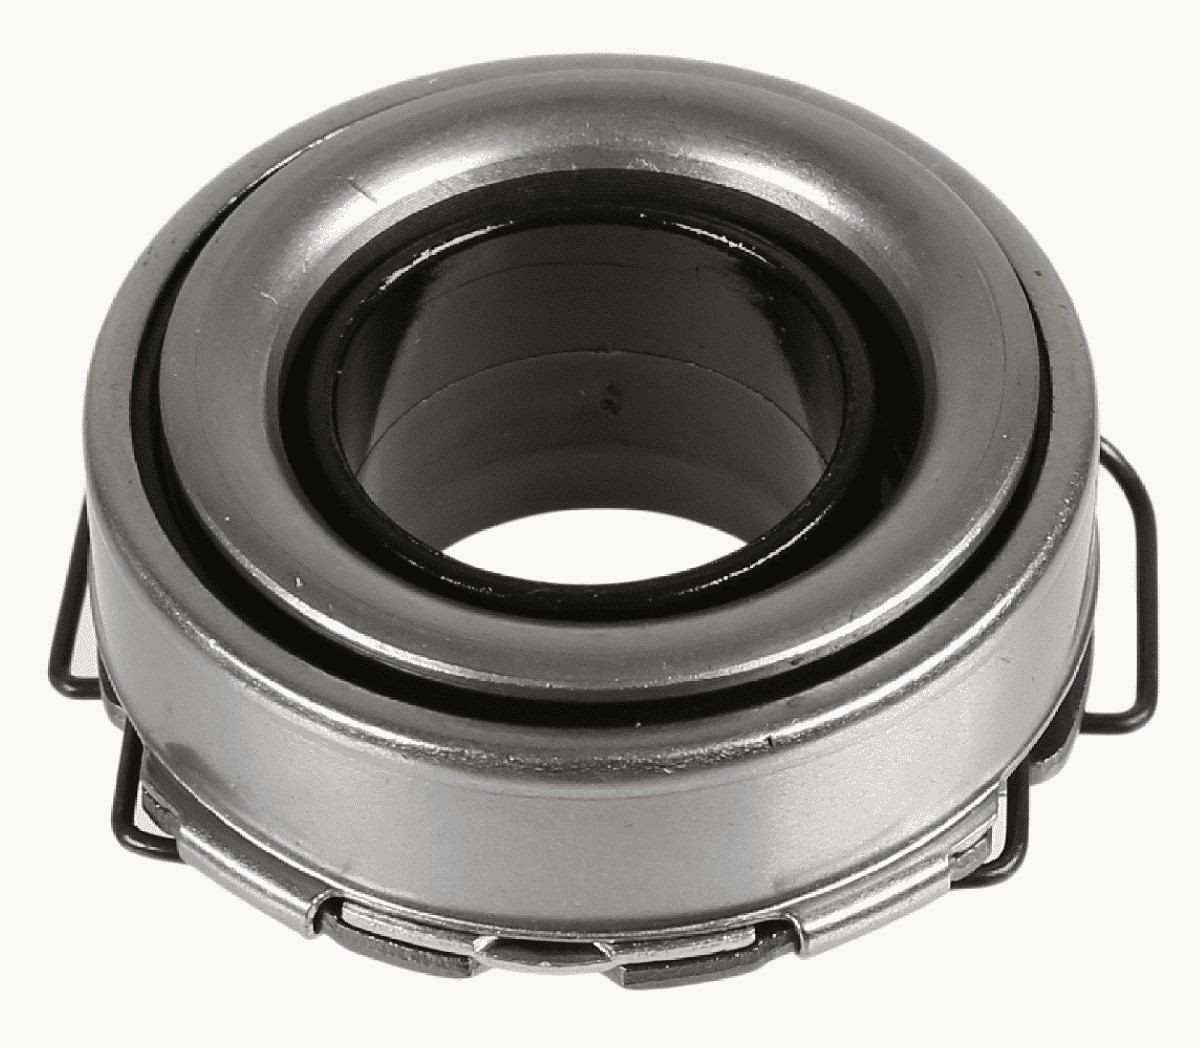 Subaru Clutch release bearing SACHS 3151 600 732 at a good price